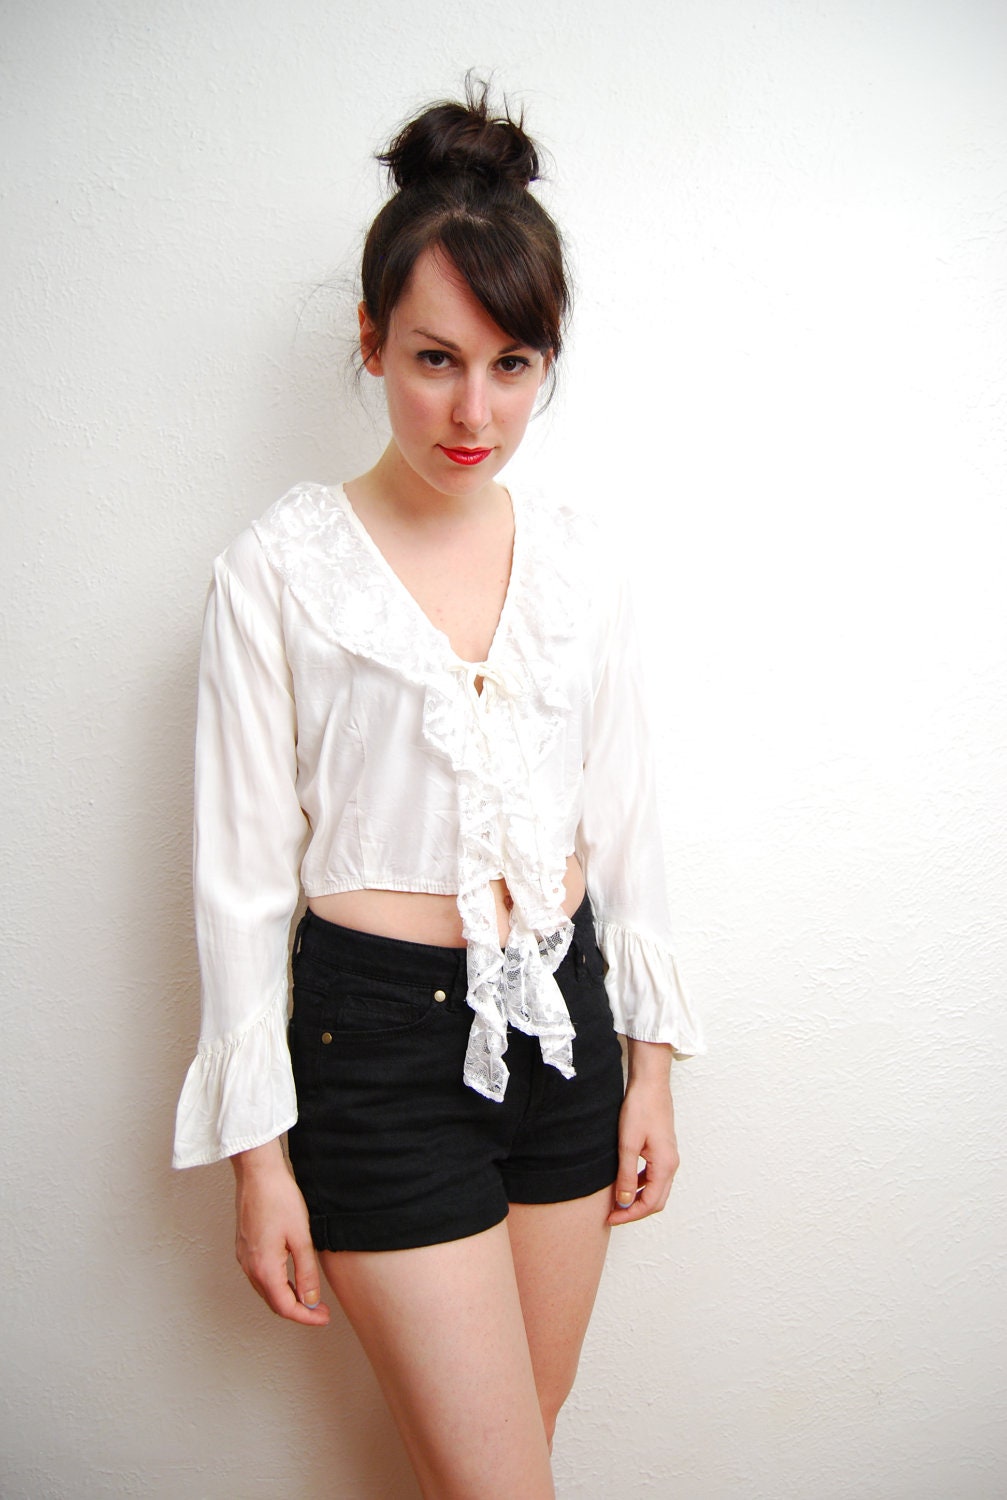 vintage 1990s / cream / lace / rayon / cropped / grunge blouse / ruffle sleeves / S-M - YeYe